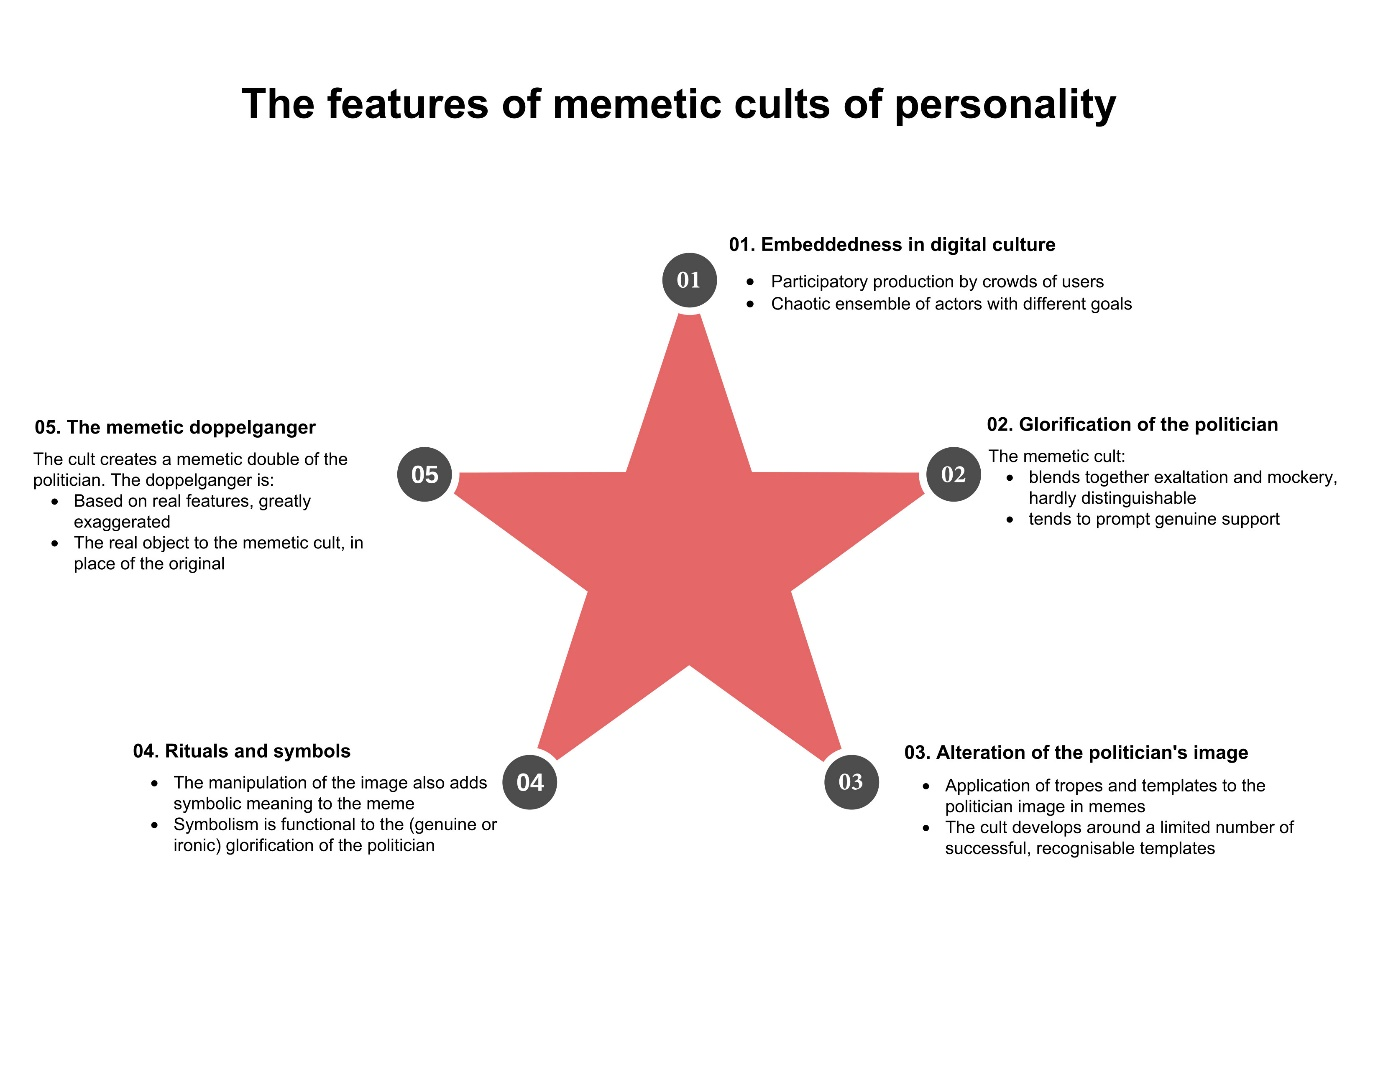 The features of memetic cults of personality, from Gerosa, A., & Giorgi, G. (2021). The Memetic Cult of Personality of Politicians During the Pandemic. Comunicazione politica, 22(3), 357-384.